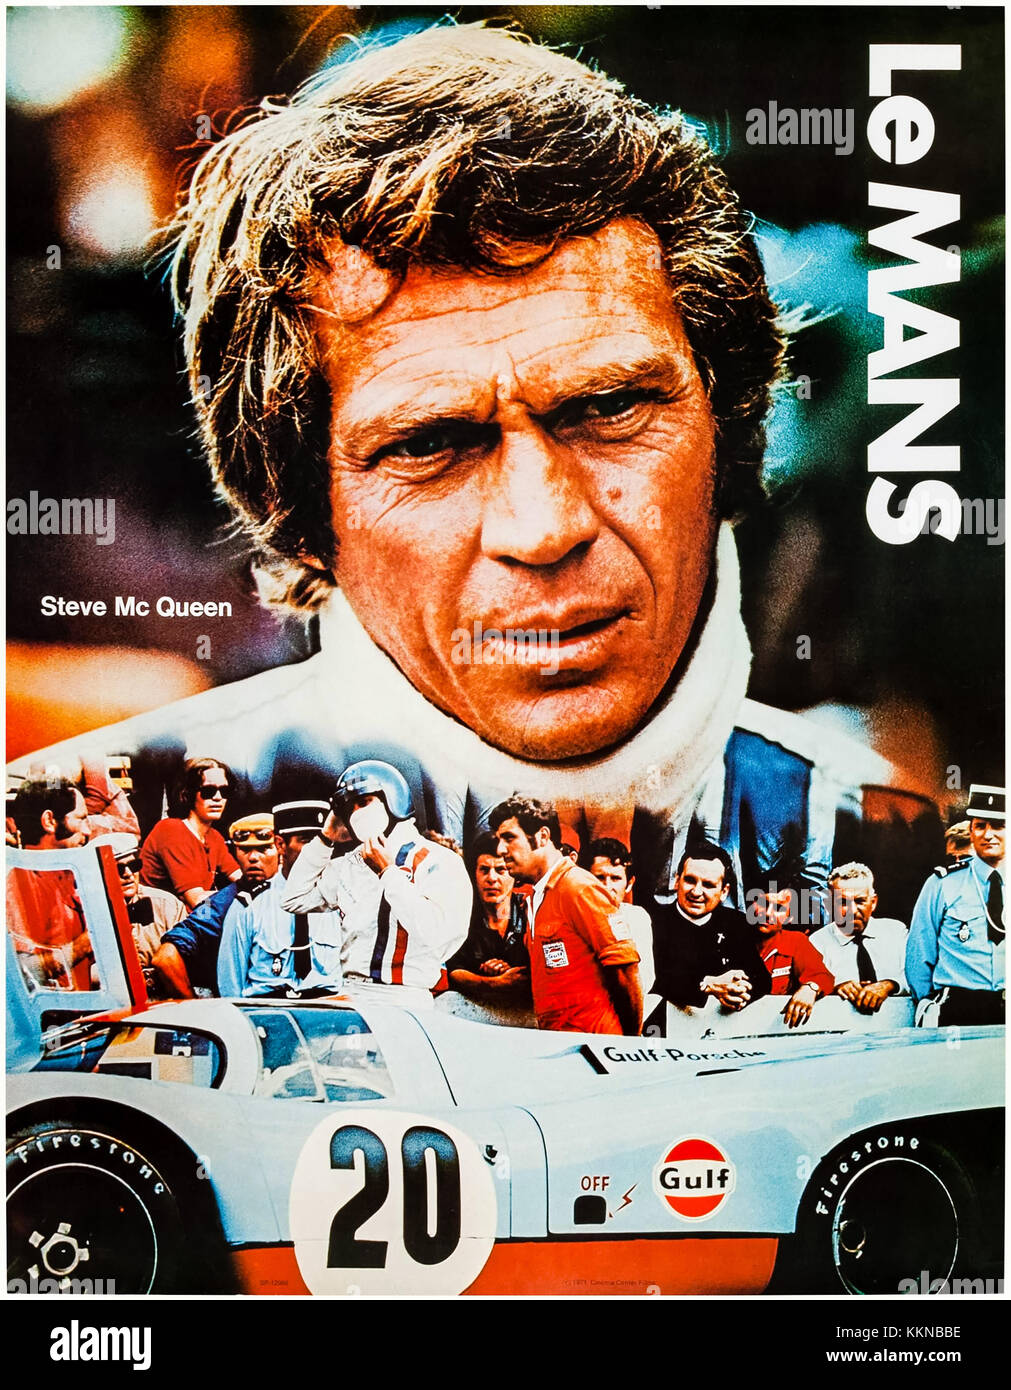 Steve McQueen as Michael Delaney in Gulf Team Porsche 917. Gulf Promotional poster tie-in with the film ‘Le Mans’ (1971) directed by Lee H. Katzin and starring Steve McQueen, Siegfried Rauch and Elga Andersen. Stock Photo